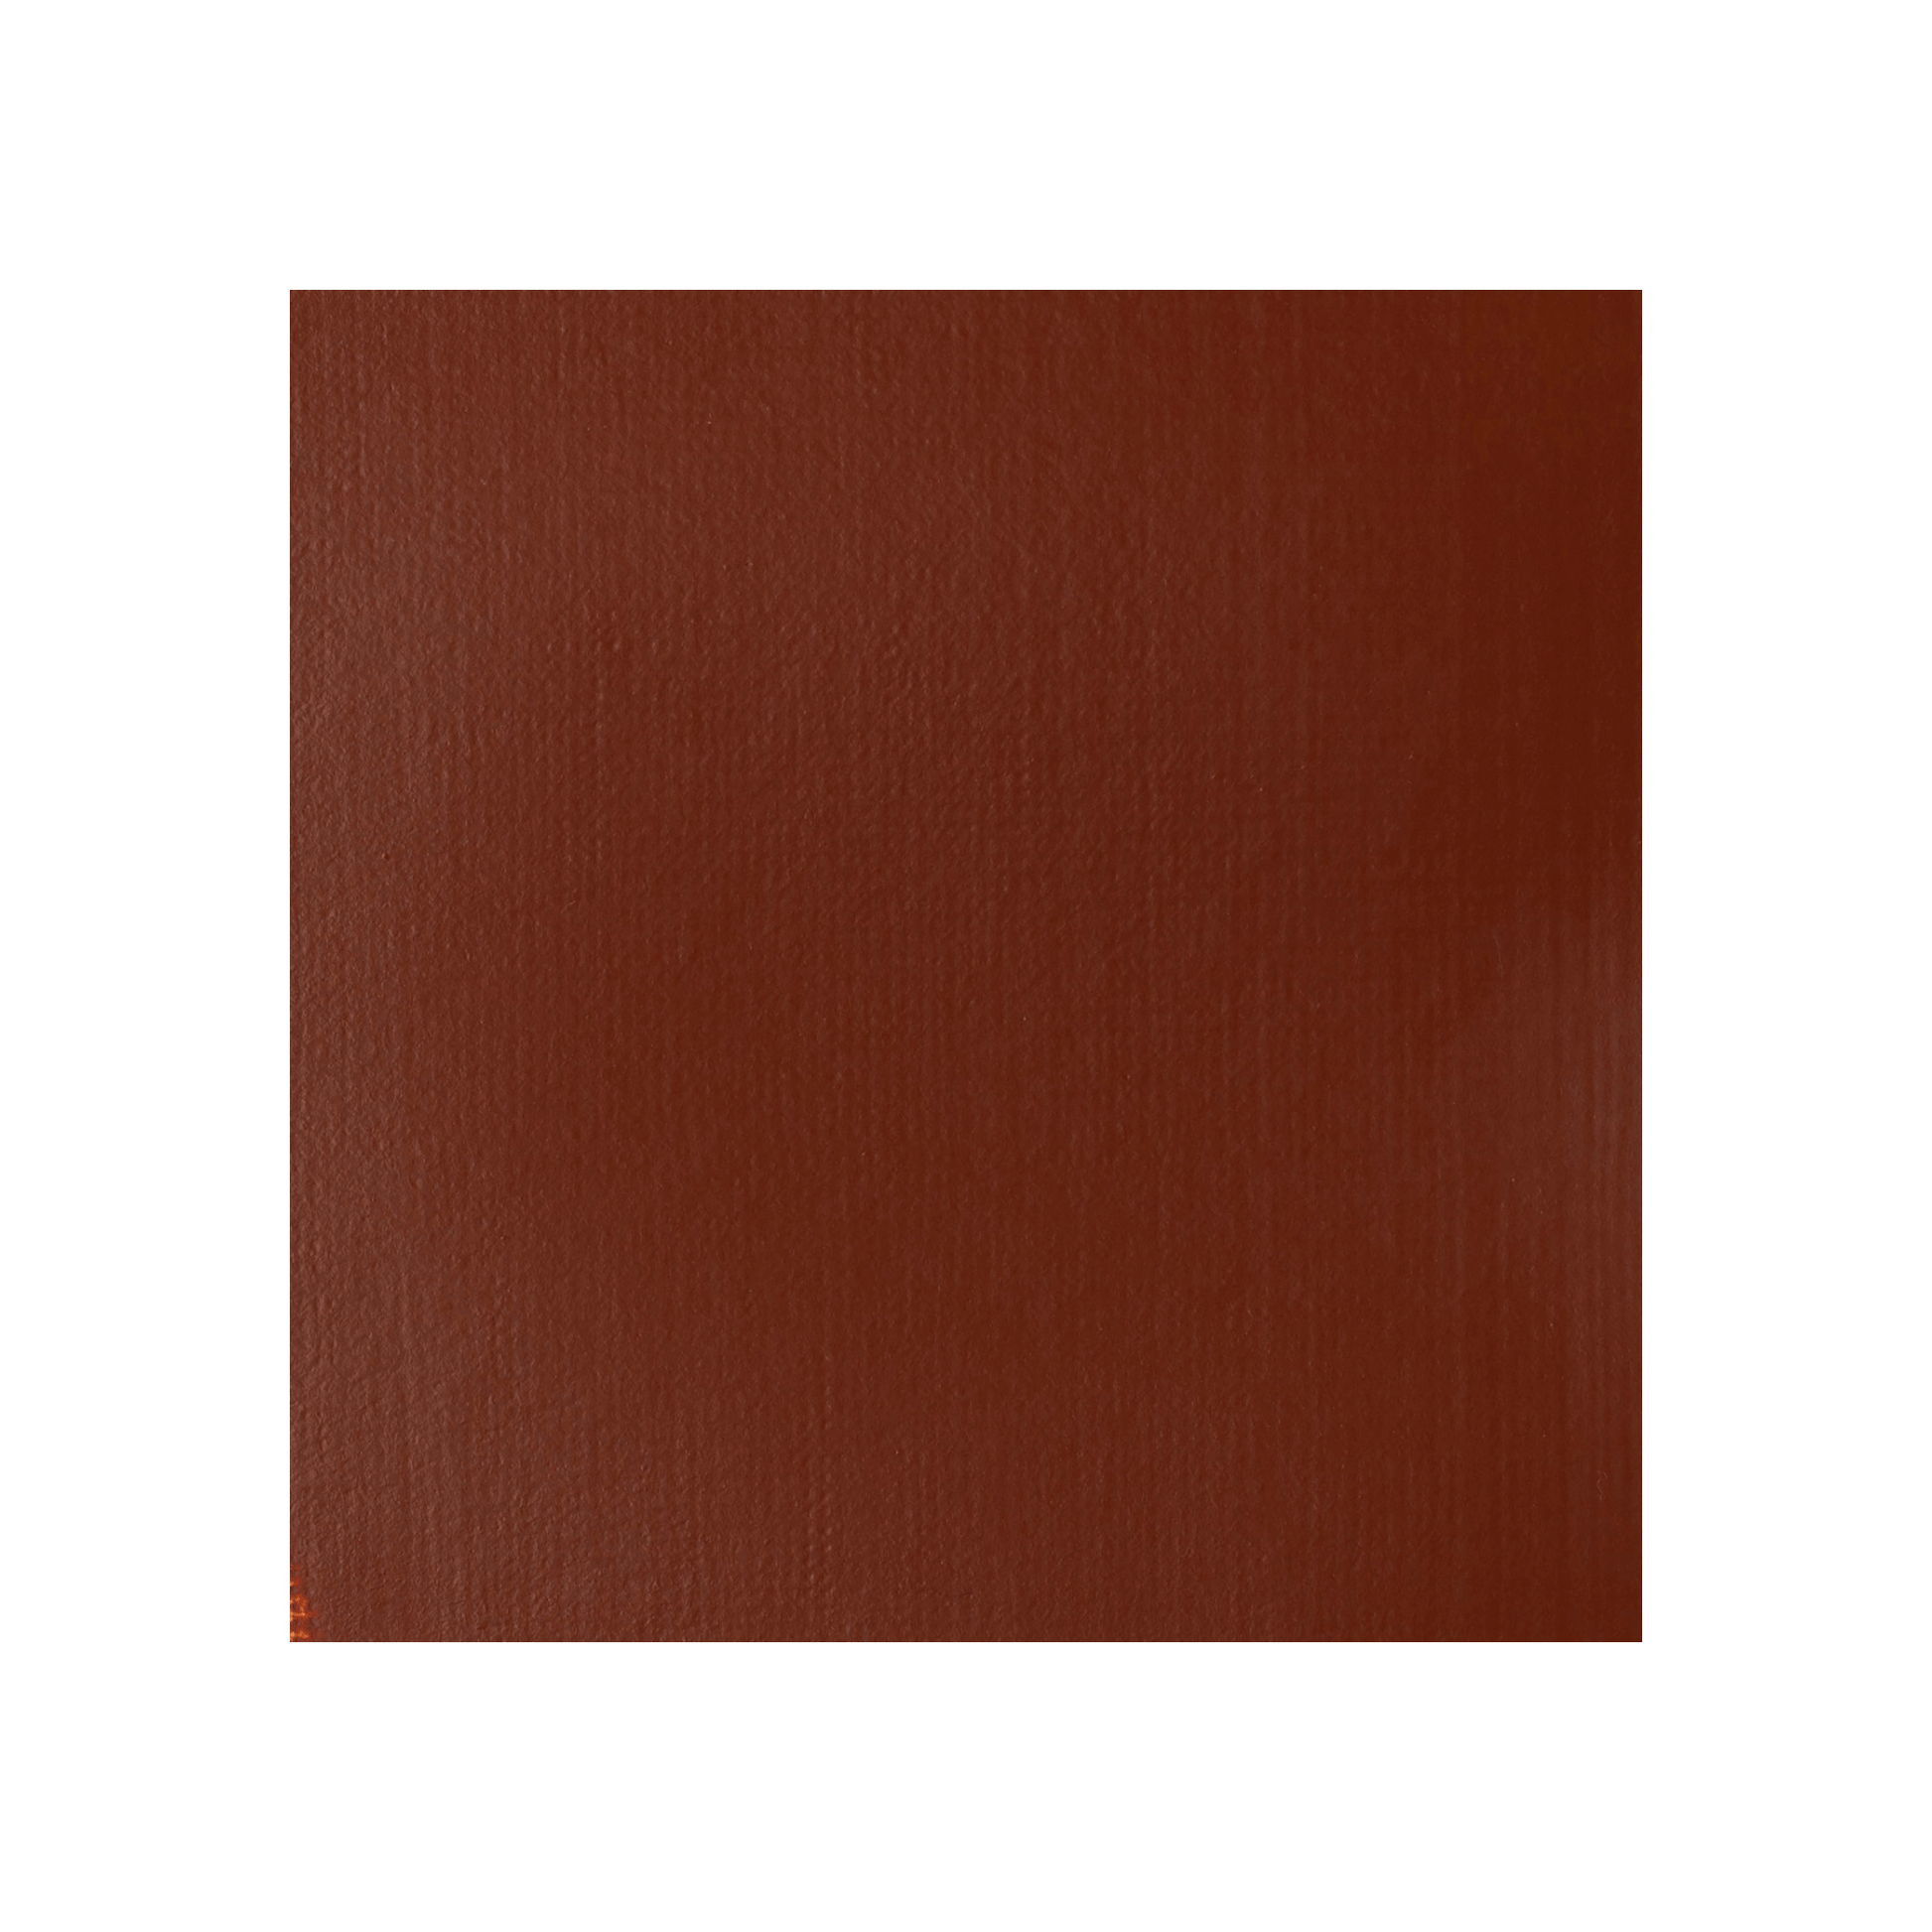 Burnt sienna colour swatch for Liquitex Professional Heavy Body Acrylic